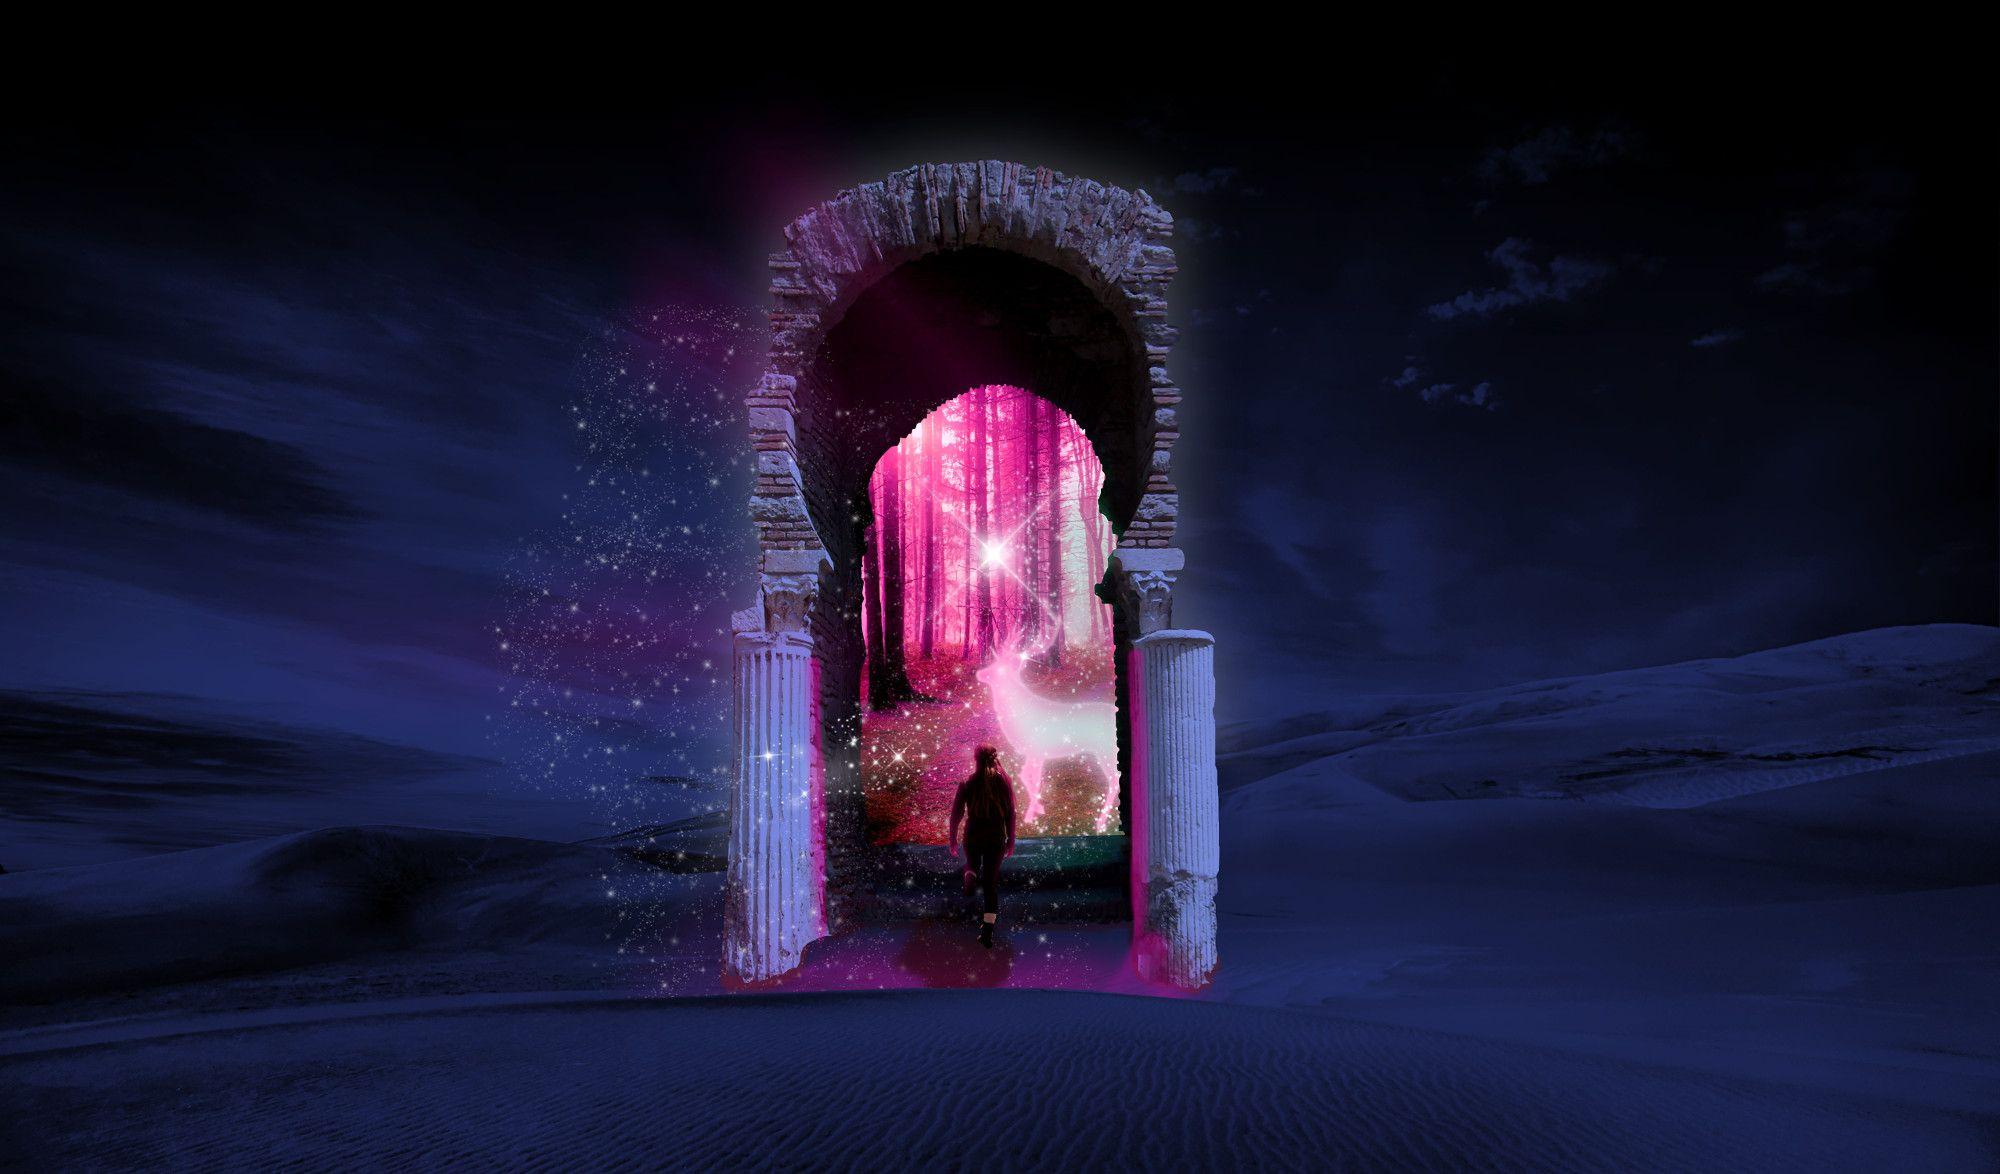 Surreal Digital Graphic Art secret doorway to another dimension, or